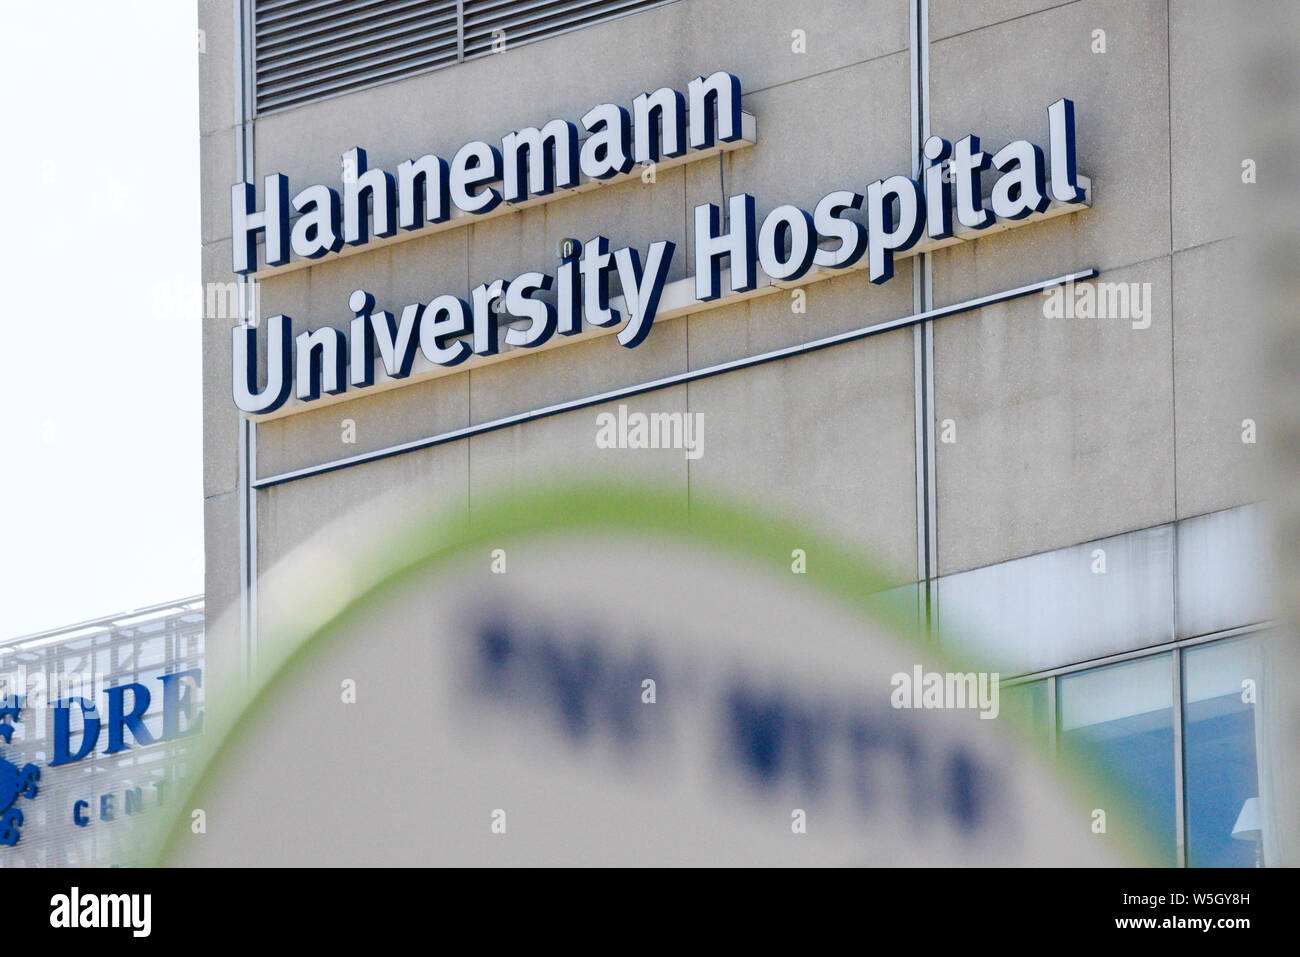 A view of the now shuttered Hahnemann University Hospital with Drexel University visible. Stock Photo